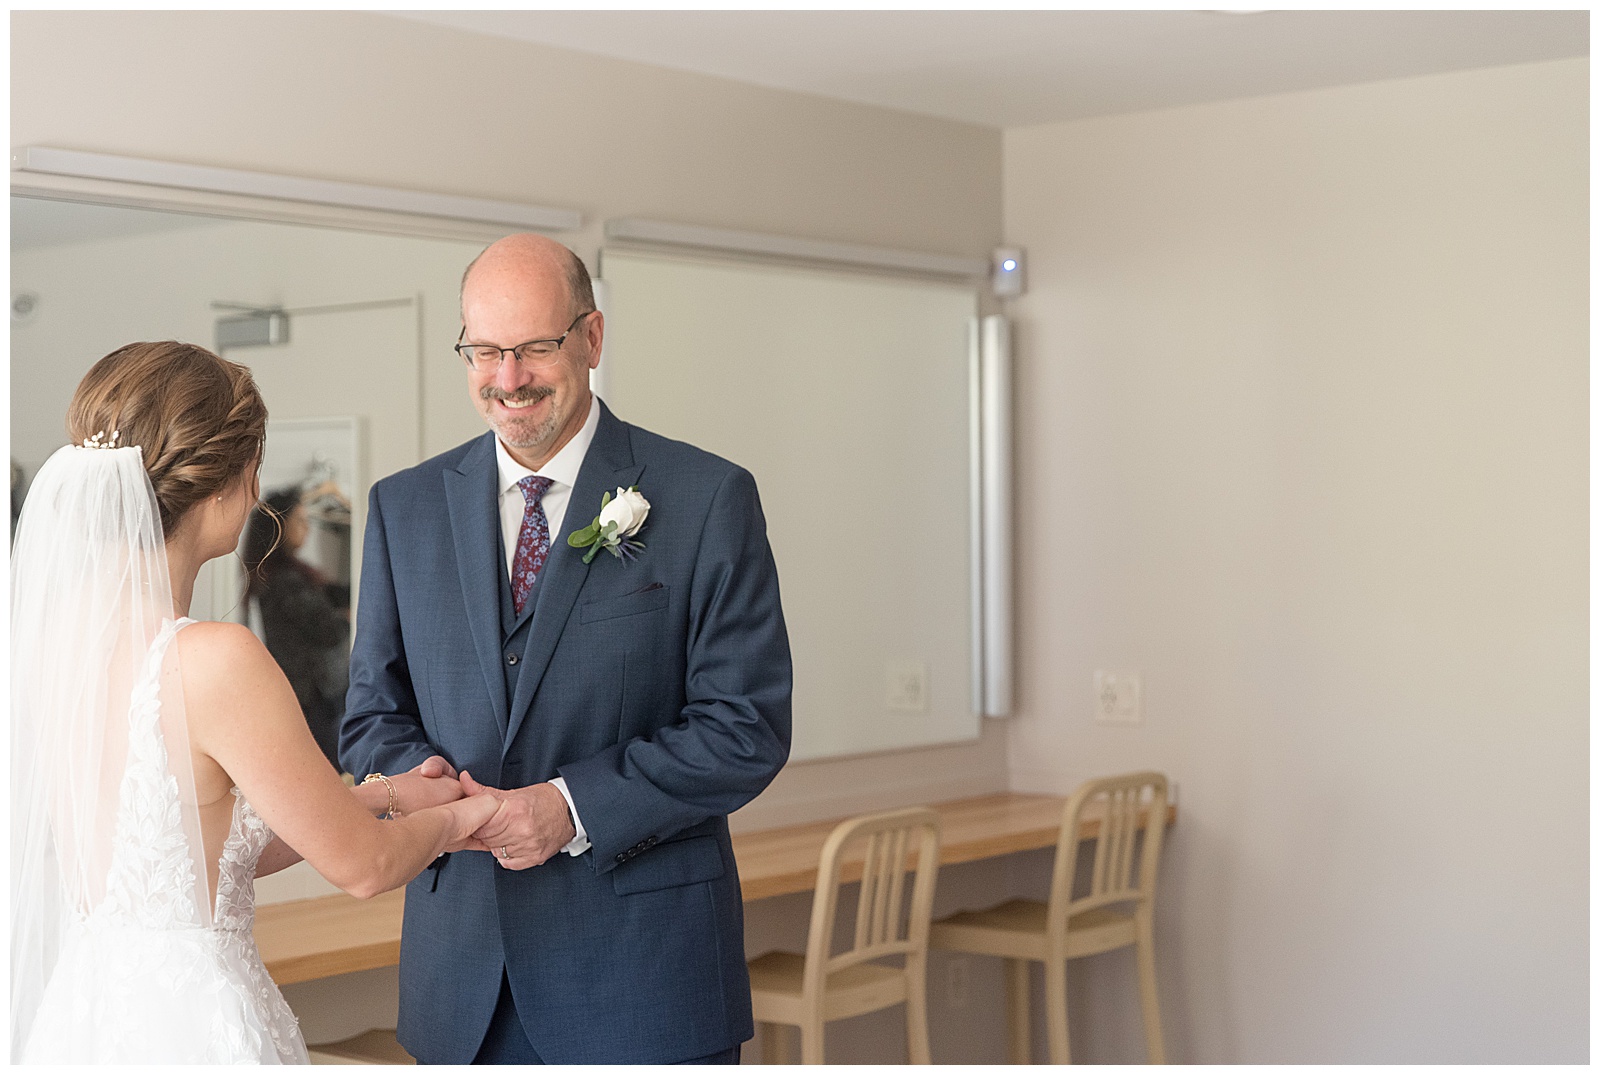 bride and her father sharing a first look moment in bridal suite as he smiles big in lititz pennsylvania